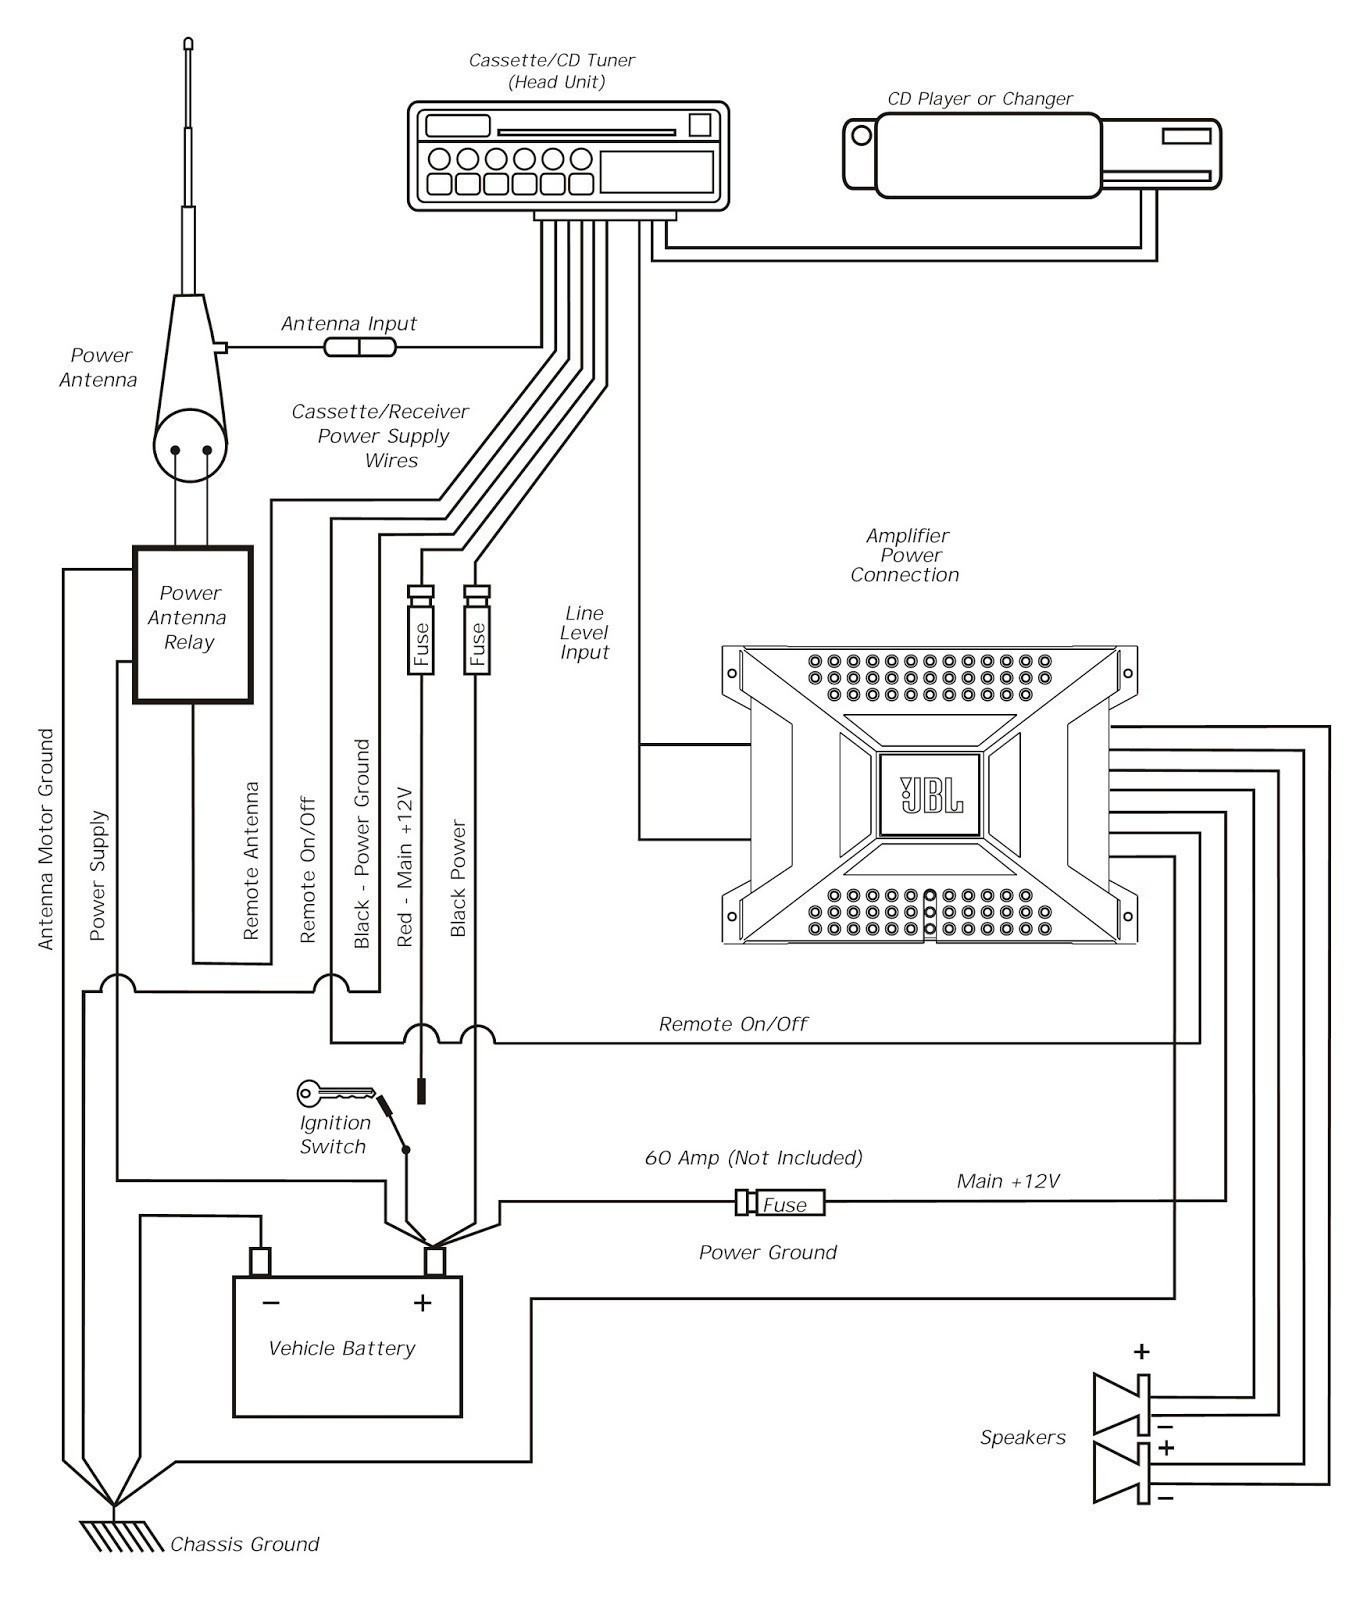 Vehicle Ac System Diagram Wiring Diagram for Ac System Inspirationa Car Air Conditioning Of Vehicle Ac System Diagram